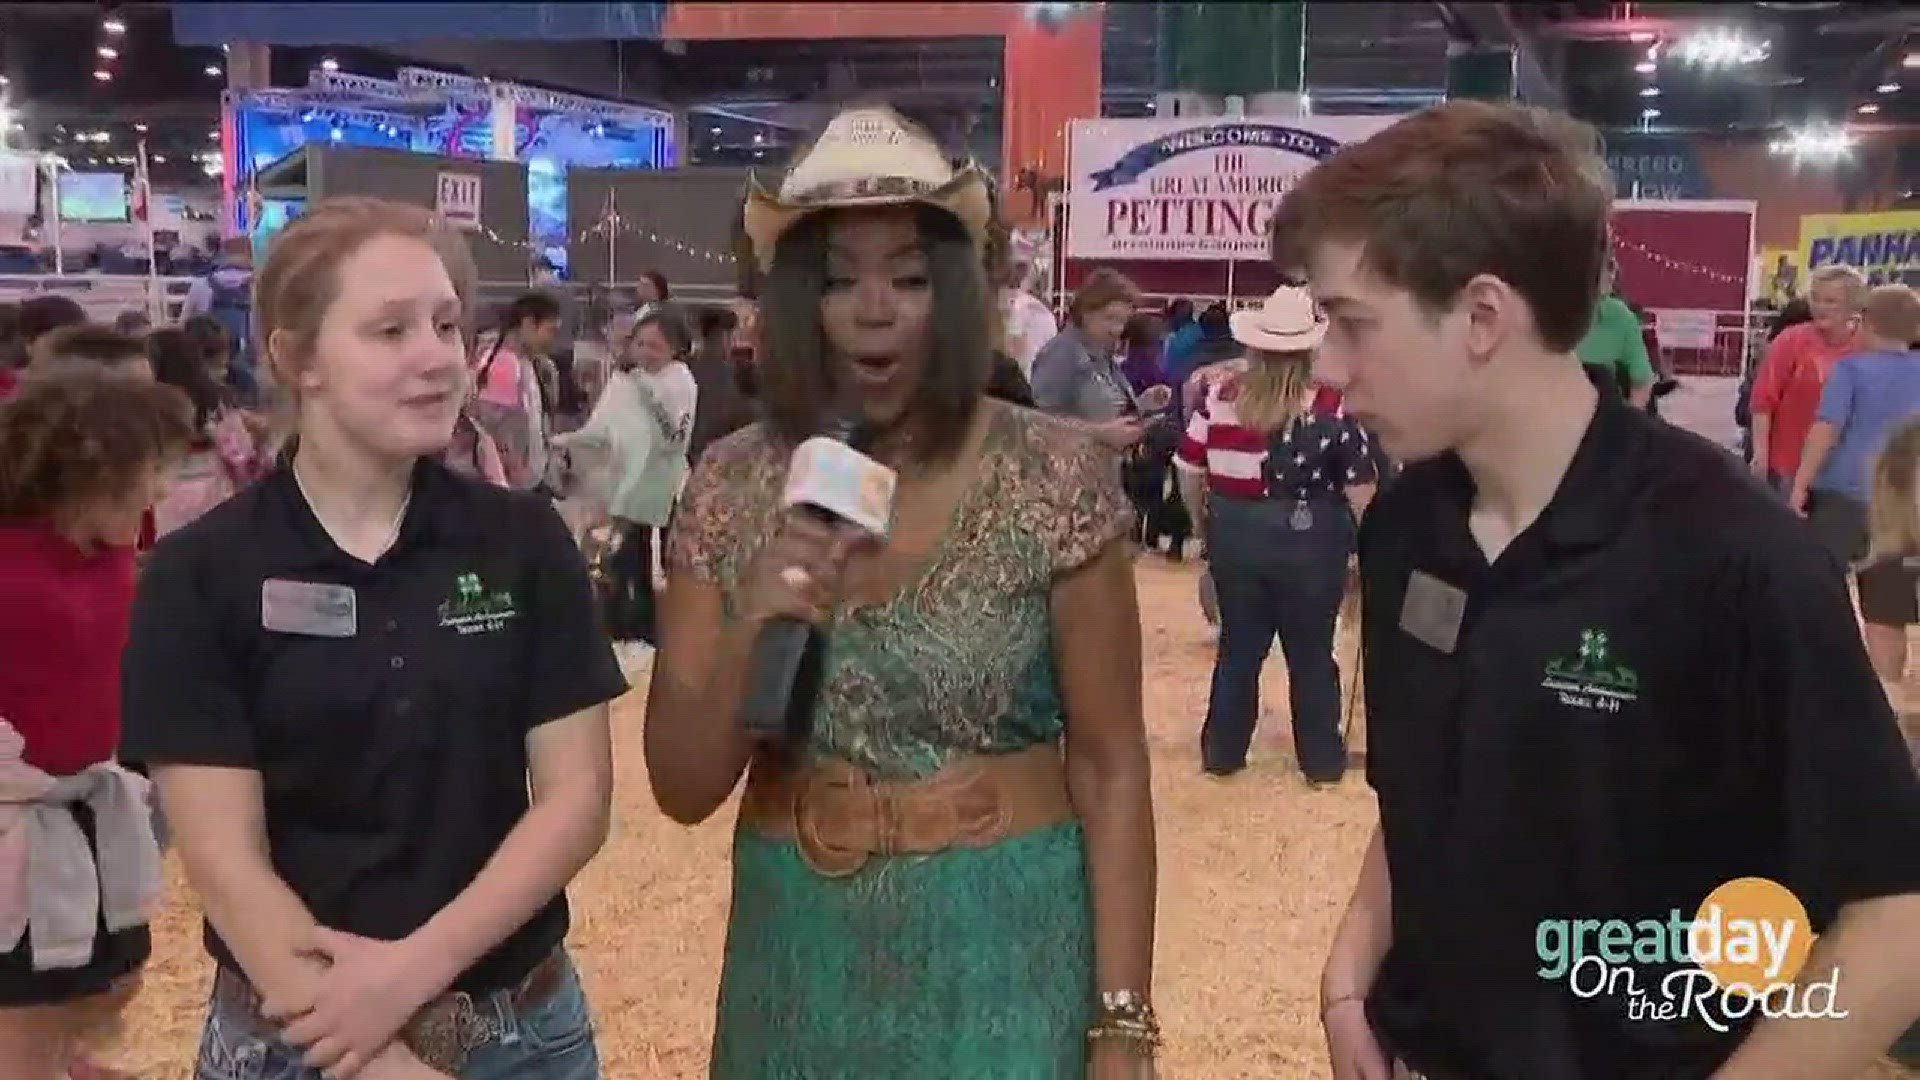 Deborah chats with some of the FFA students at the Houston Livestock Show & Rodeo.